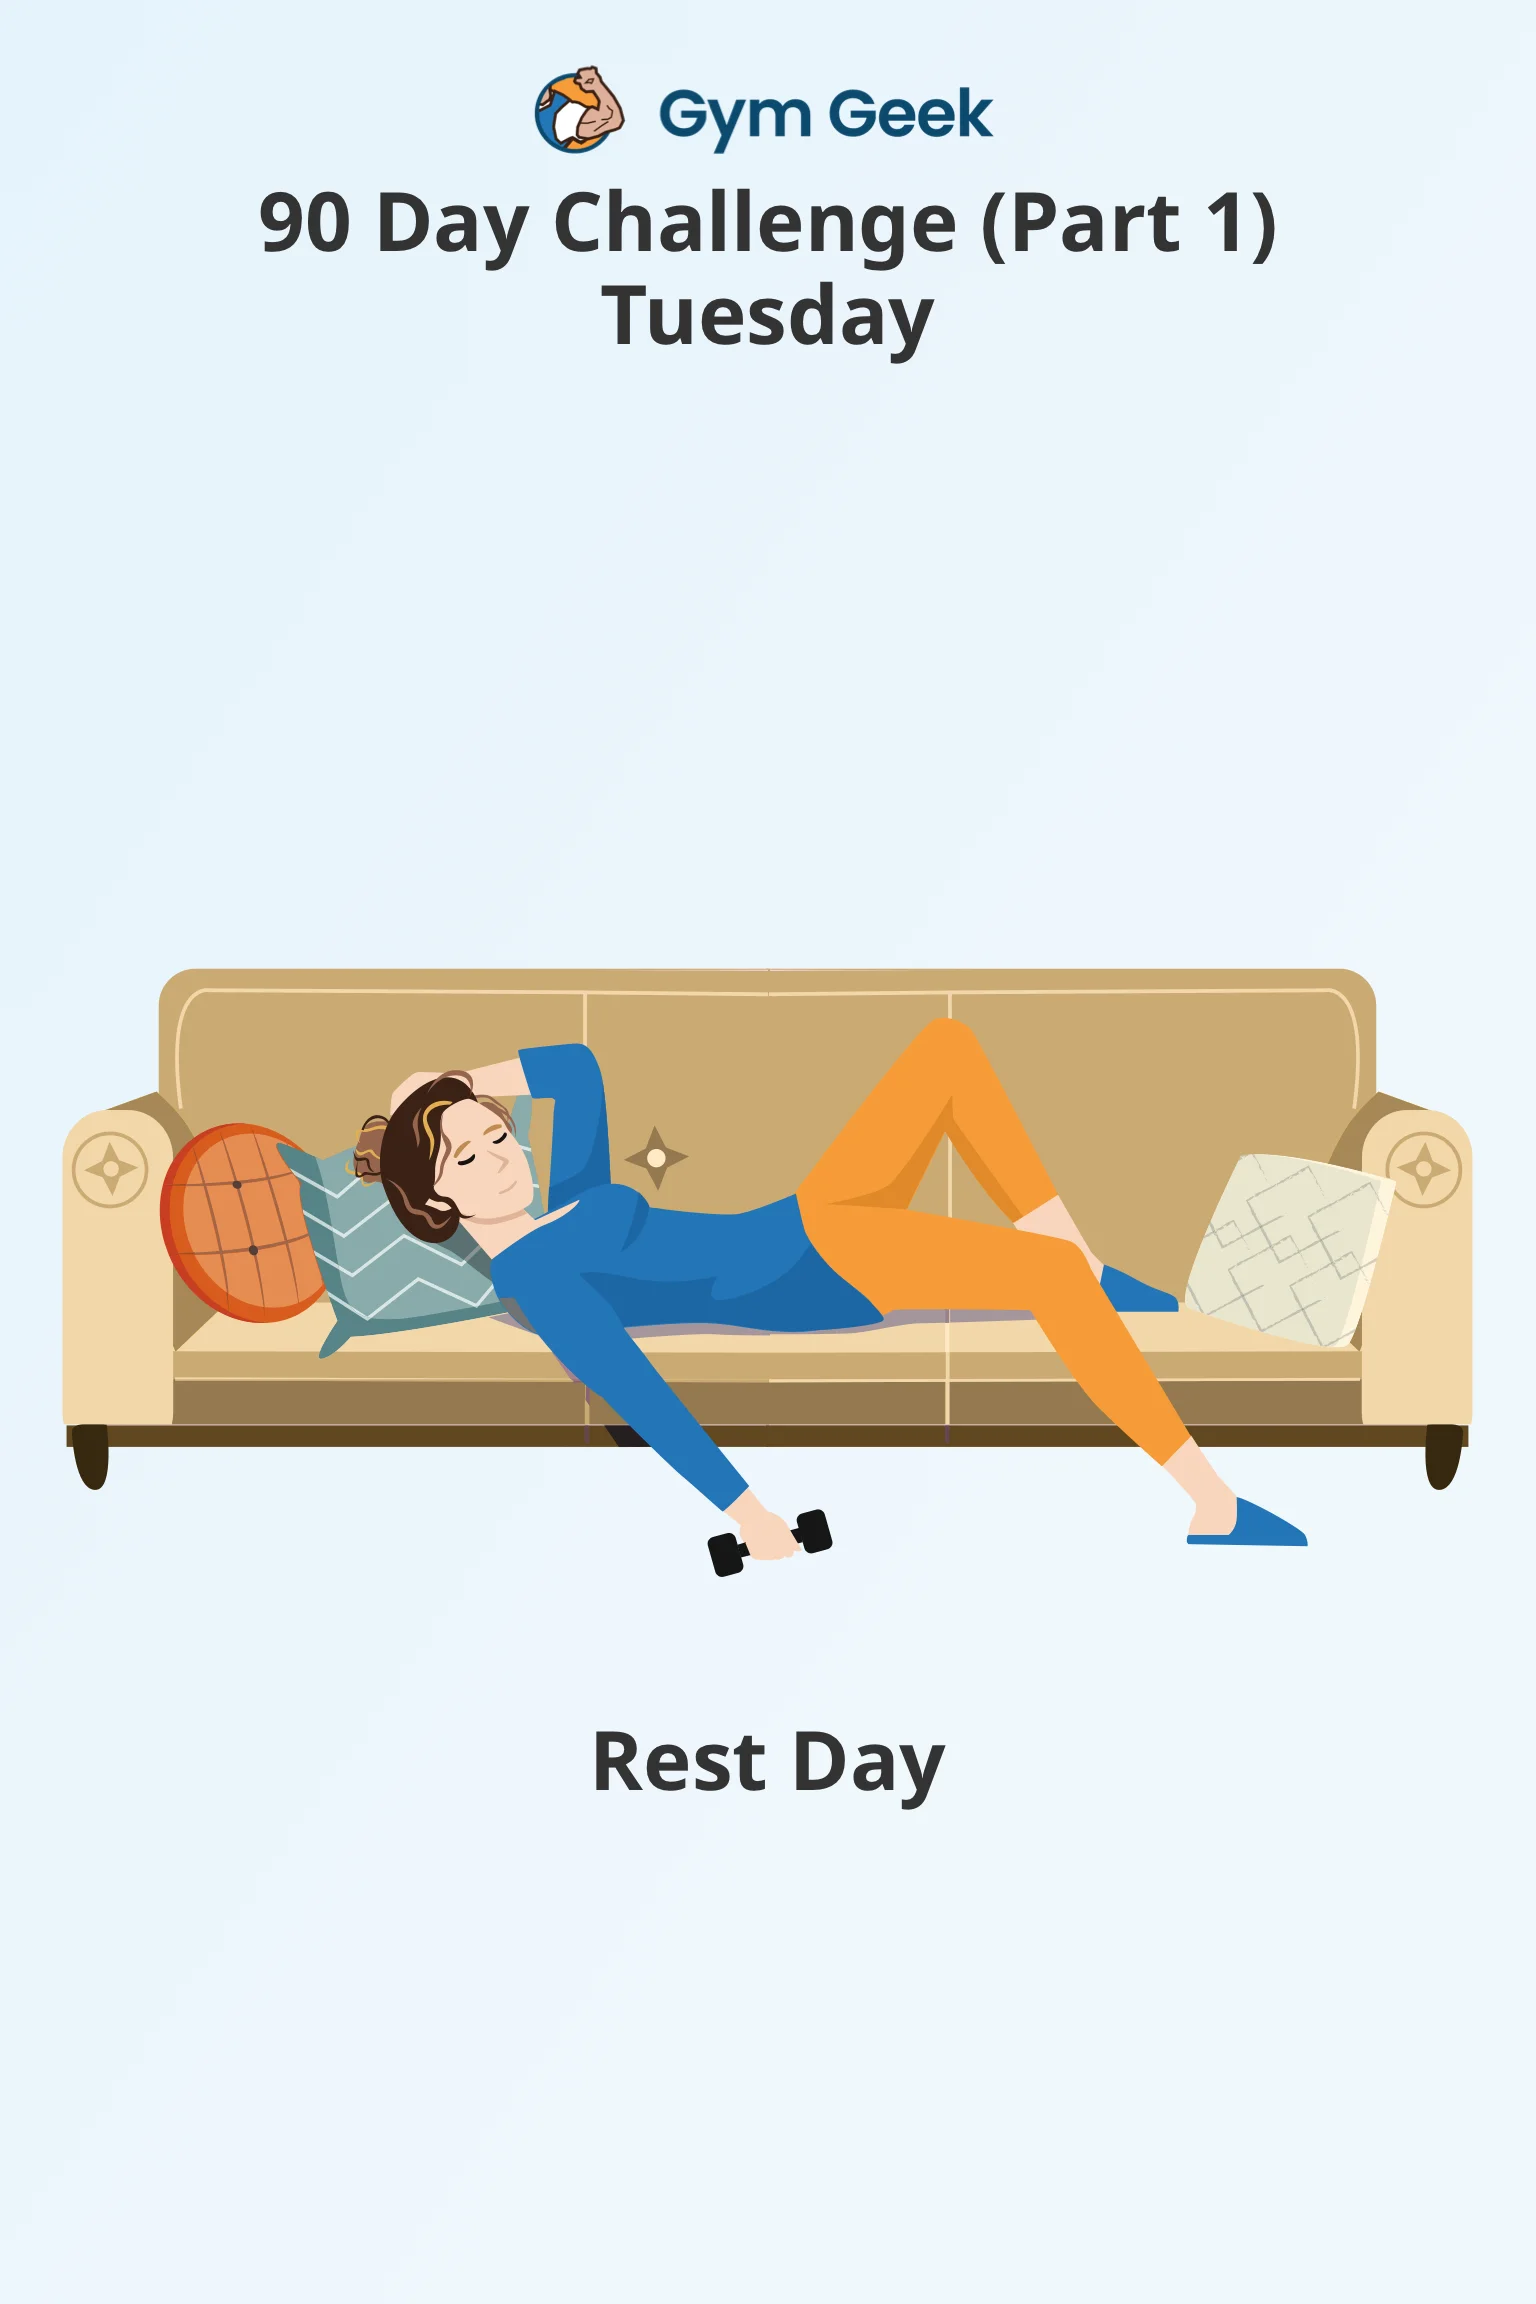 infographic - 90 day workout challenge, stage 1, Tuesday (Rest Day)